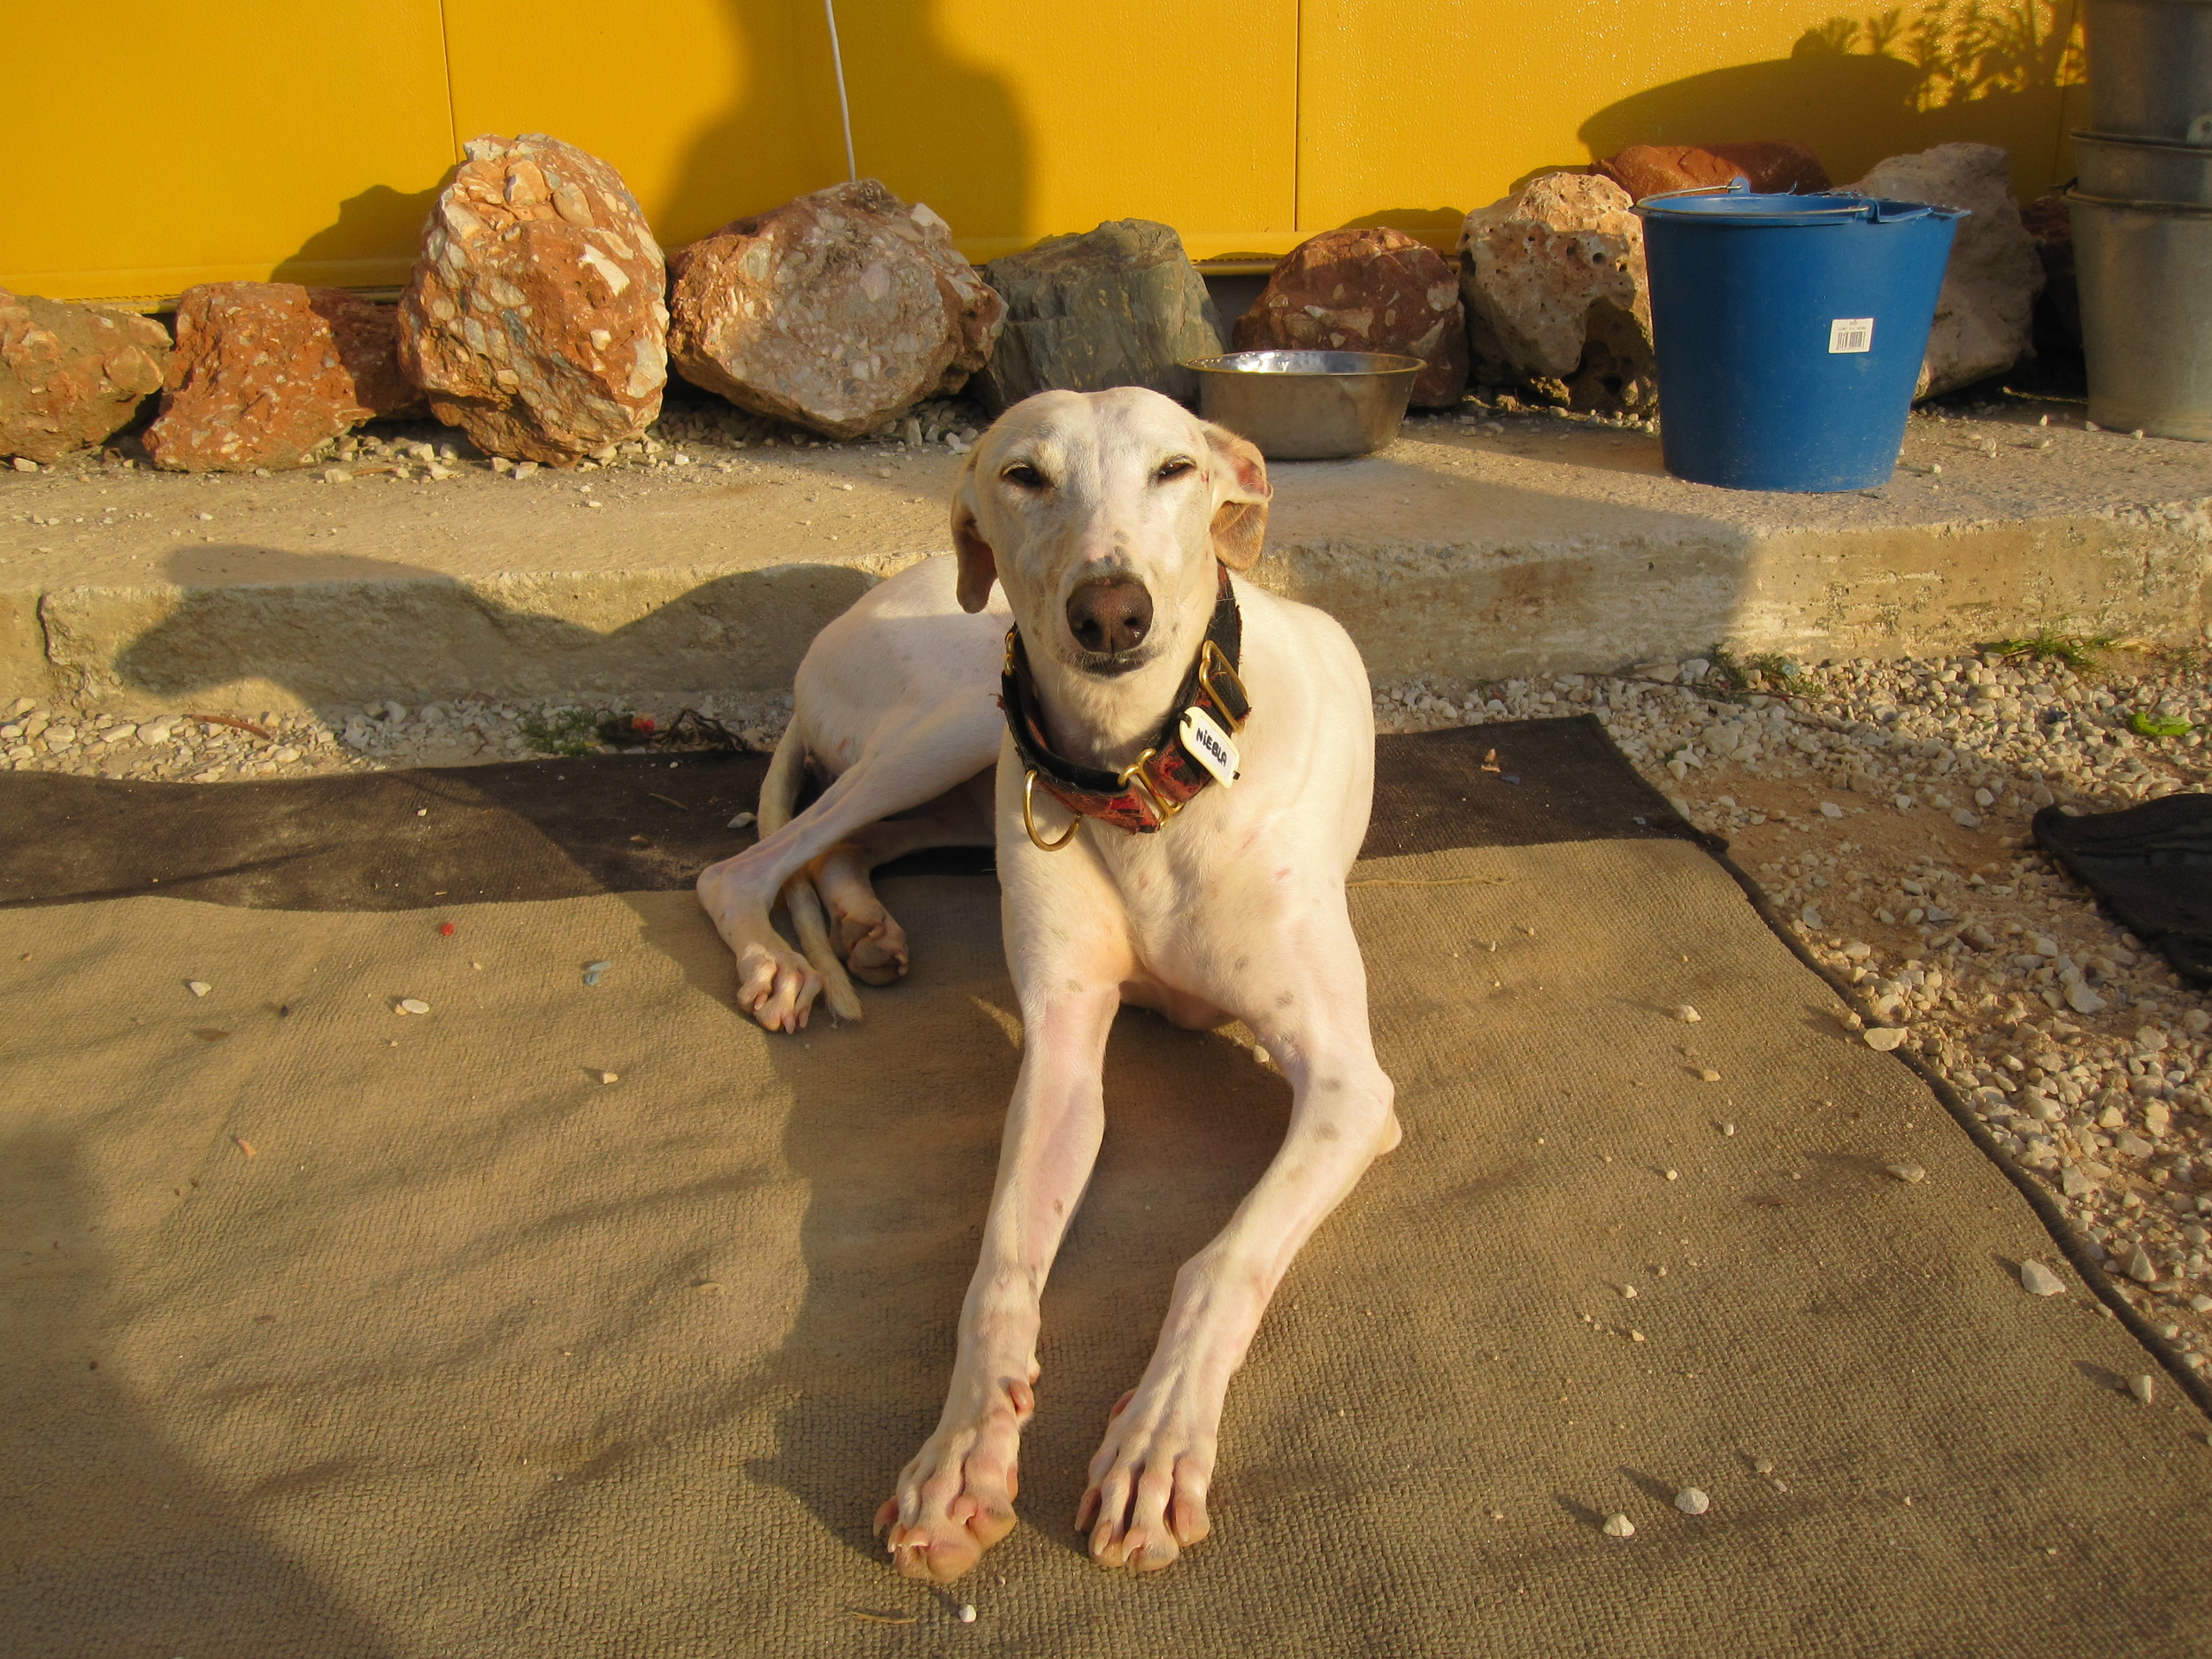 Niebla waiting for her forever home at GEF! Could that be you??